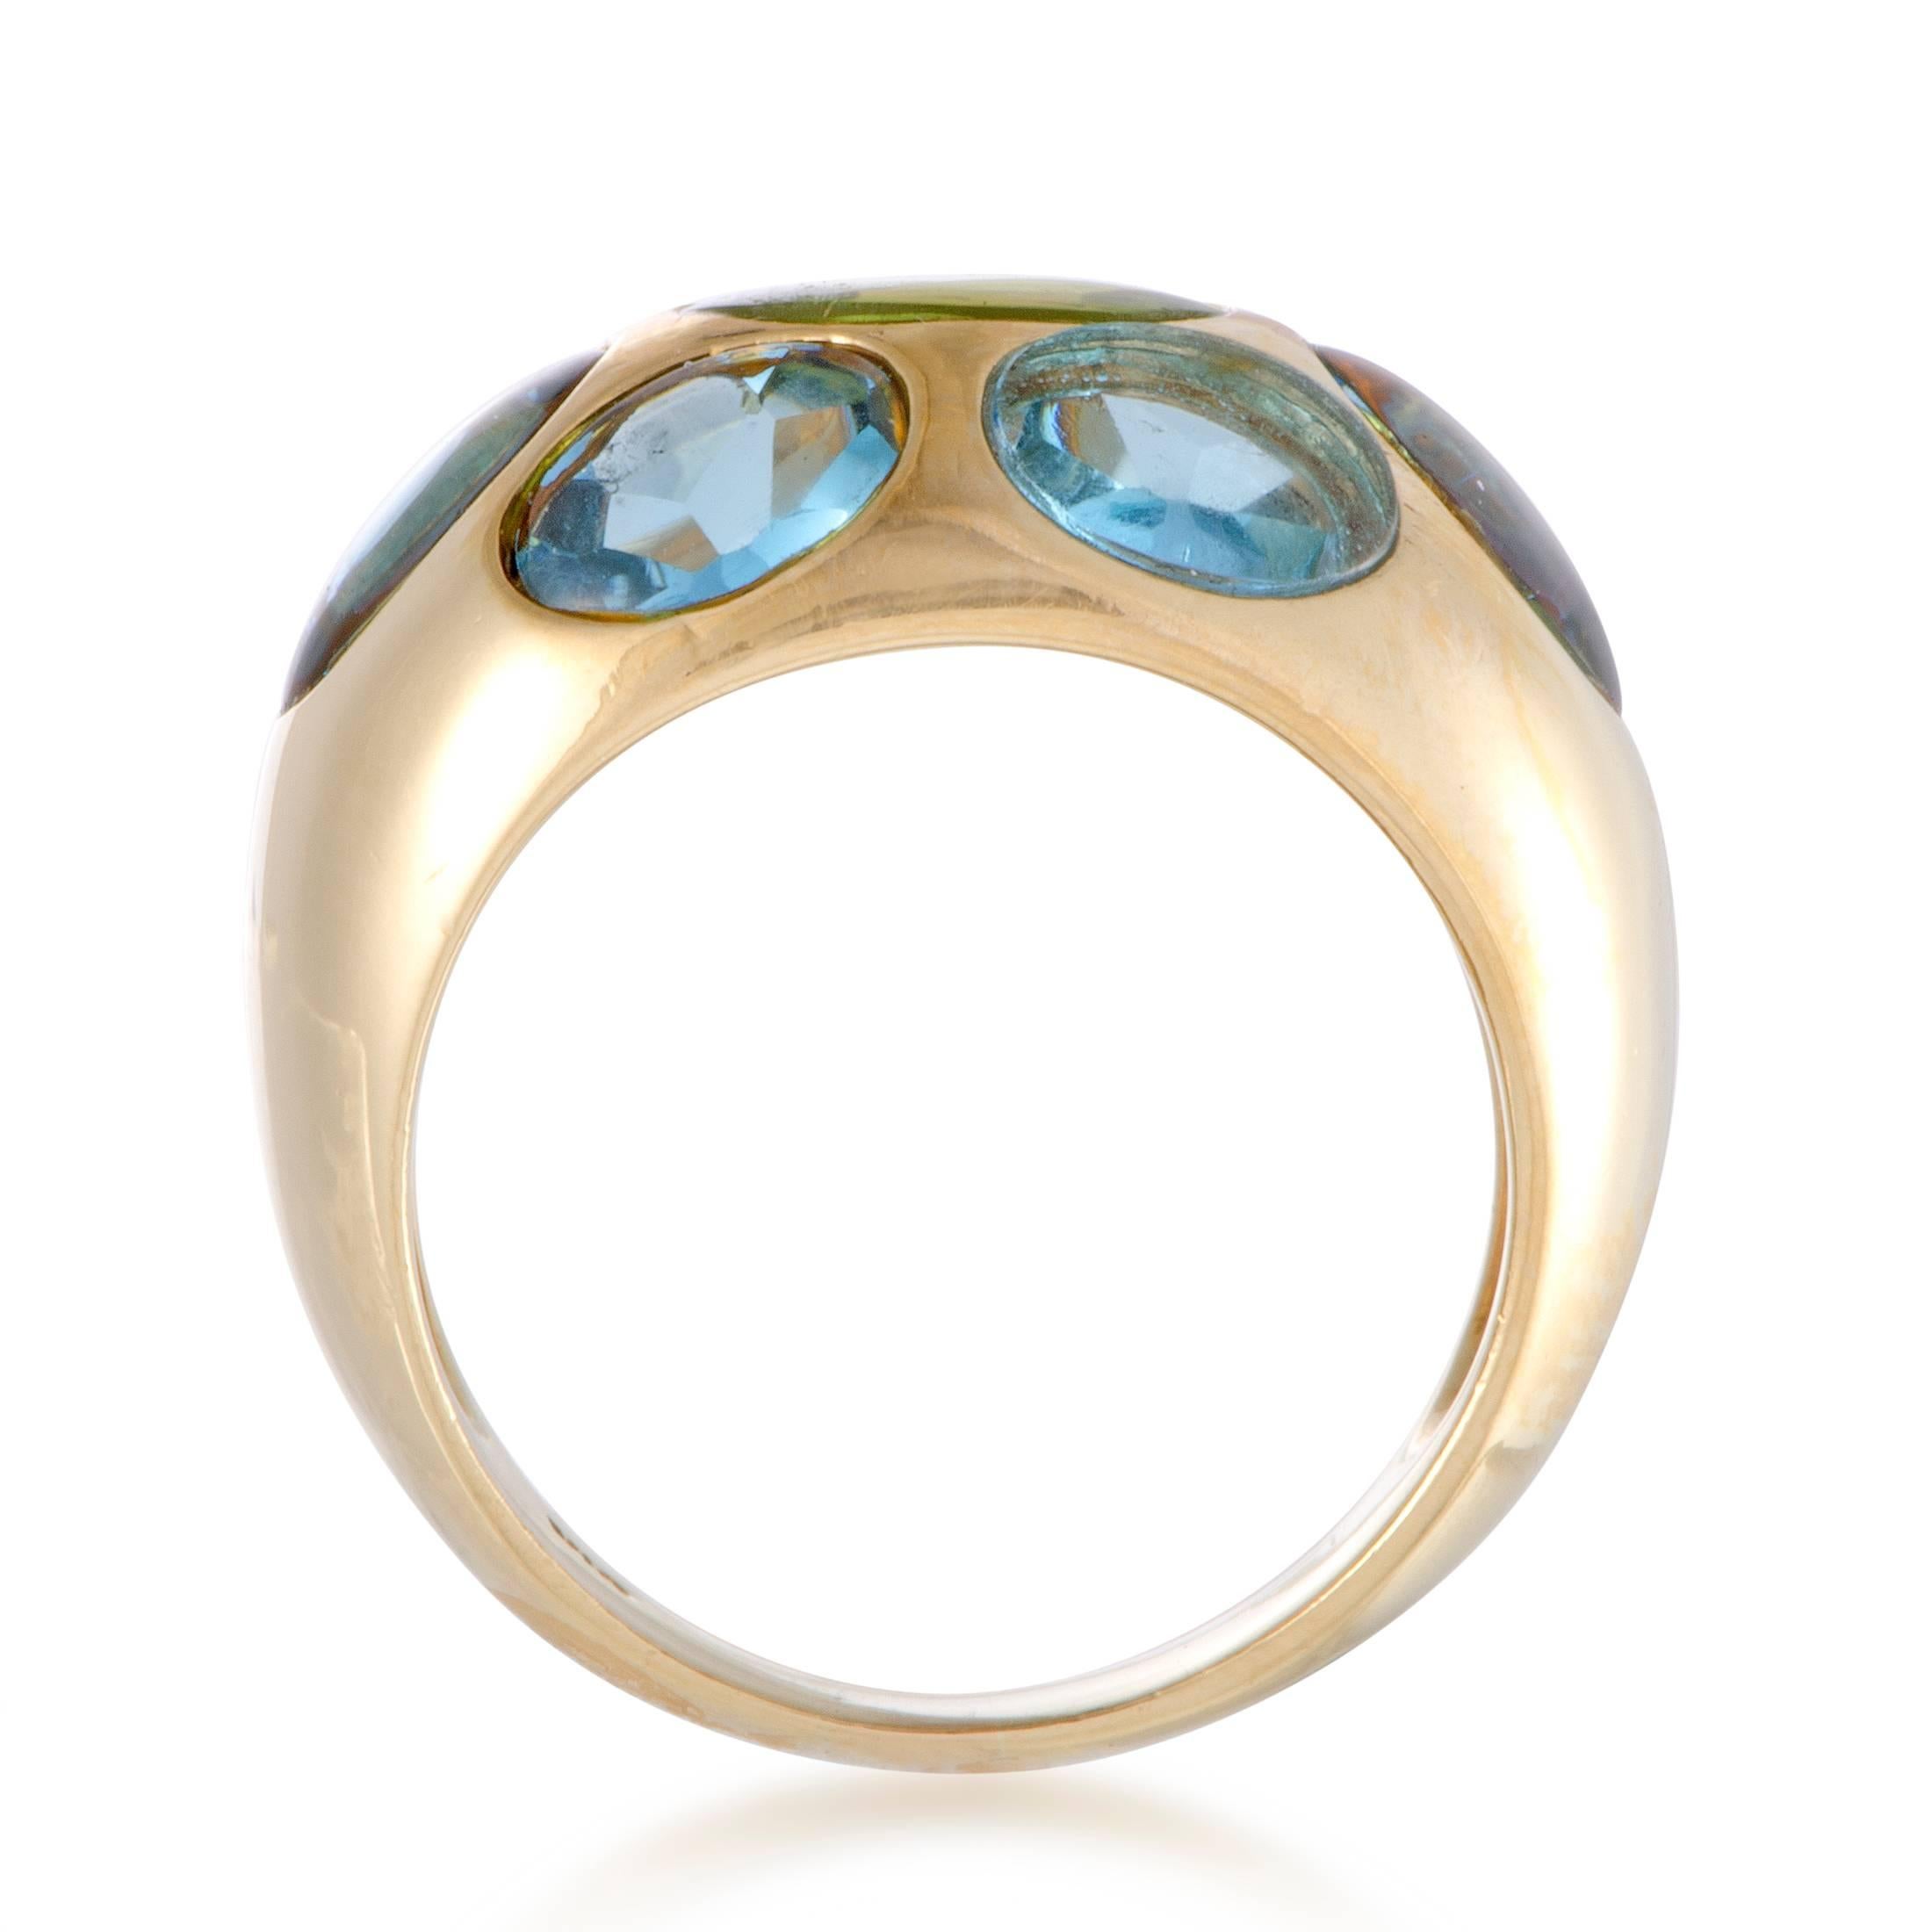 This splendid ring offers an endearingly colorful appearance thanks to the imaginative combination of radiant 18K yellow gold and sublime topaz and citrine stones.
Ring Size:
Ring Top Dimensions: 15mm x25mm
Band Thickness: 6mm
Ring Top Height: 7mm